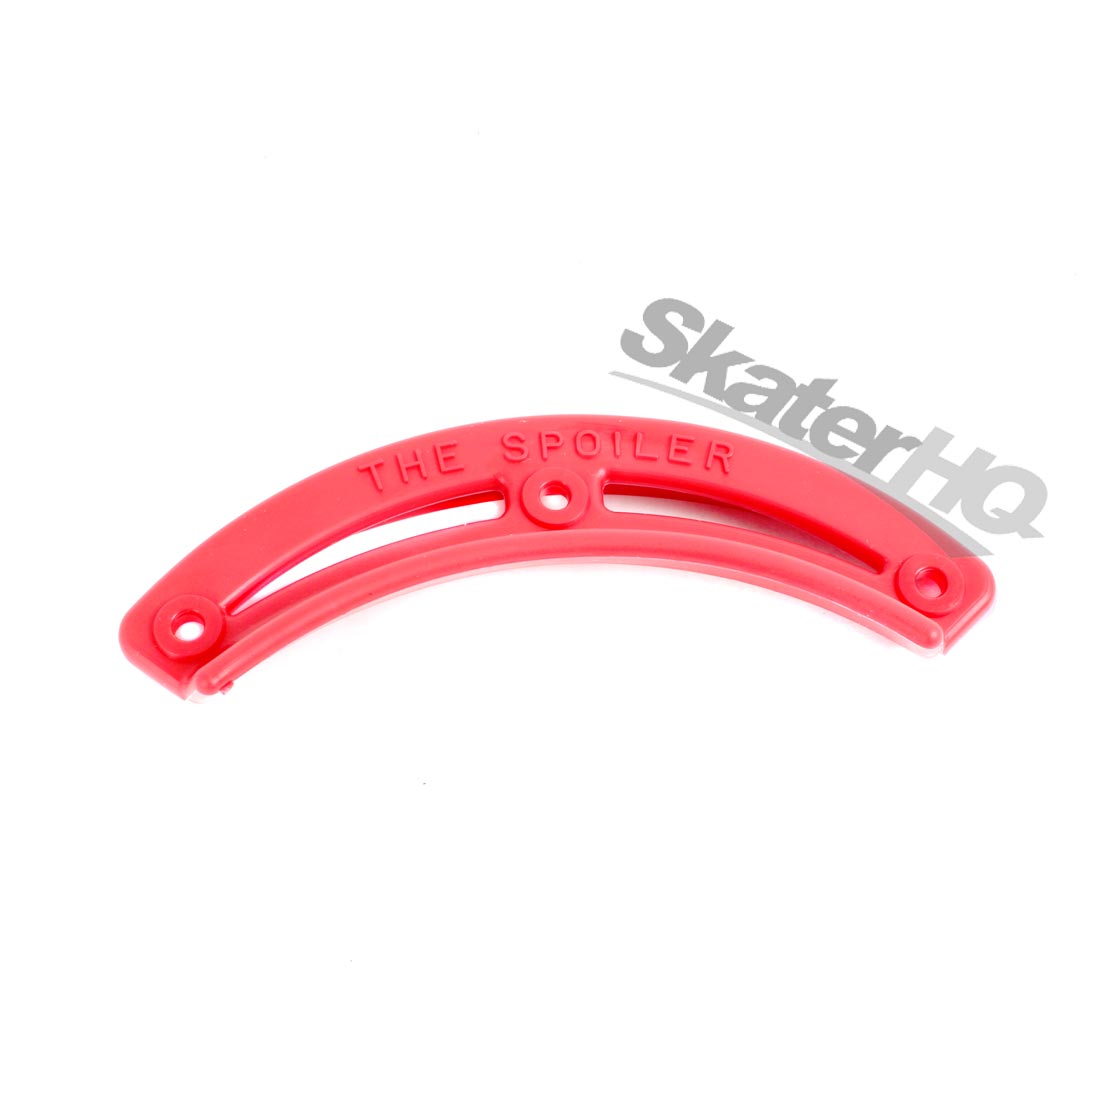 Spoilers Red 5.75 Skateboard Hardware and Parts